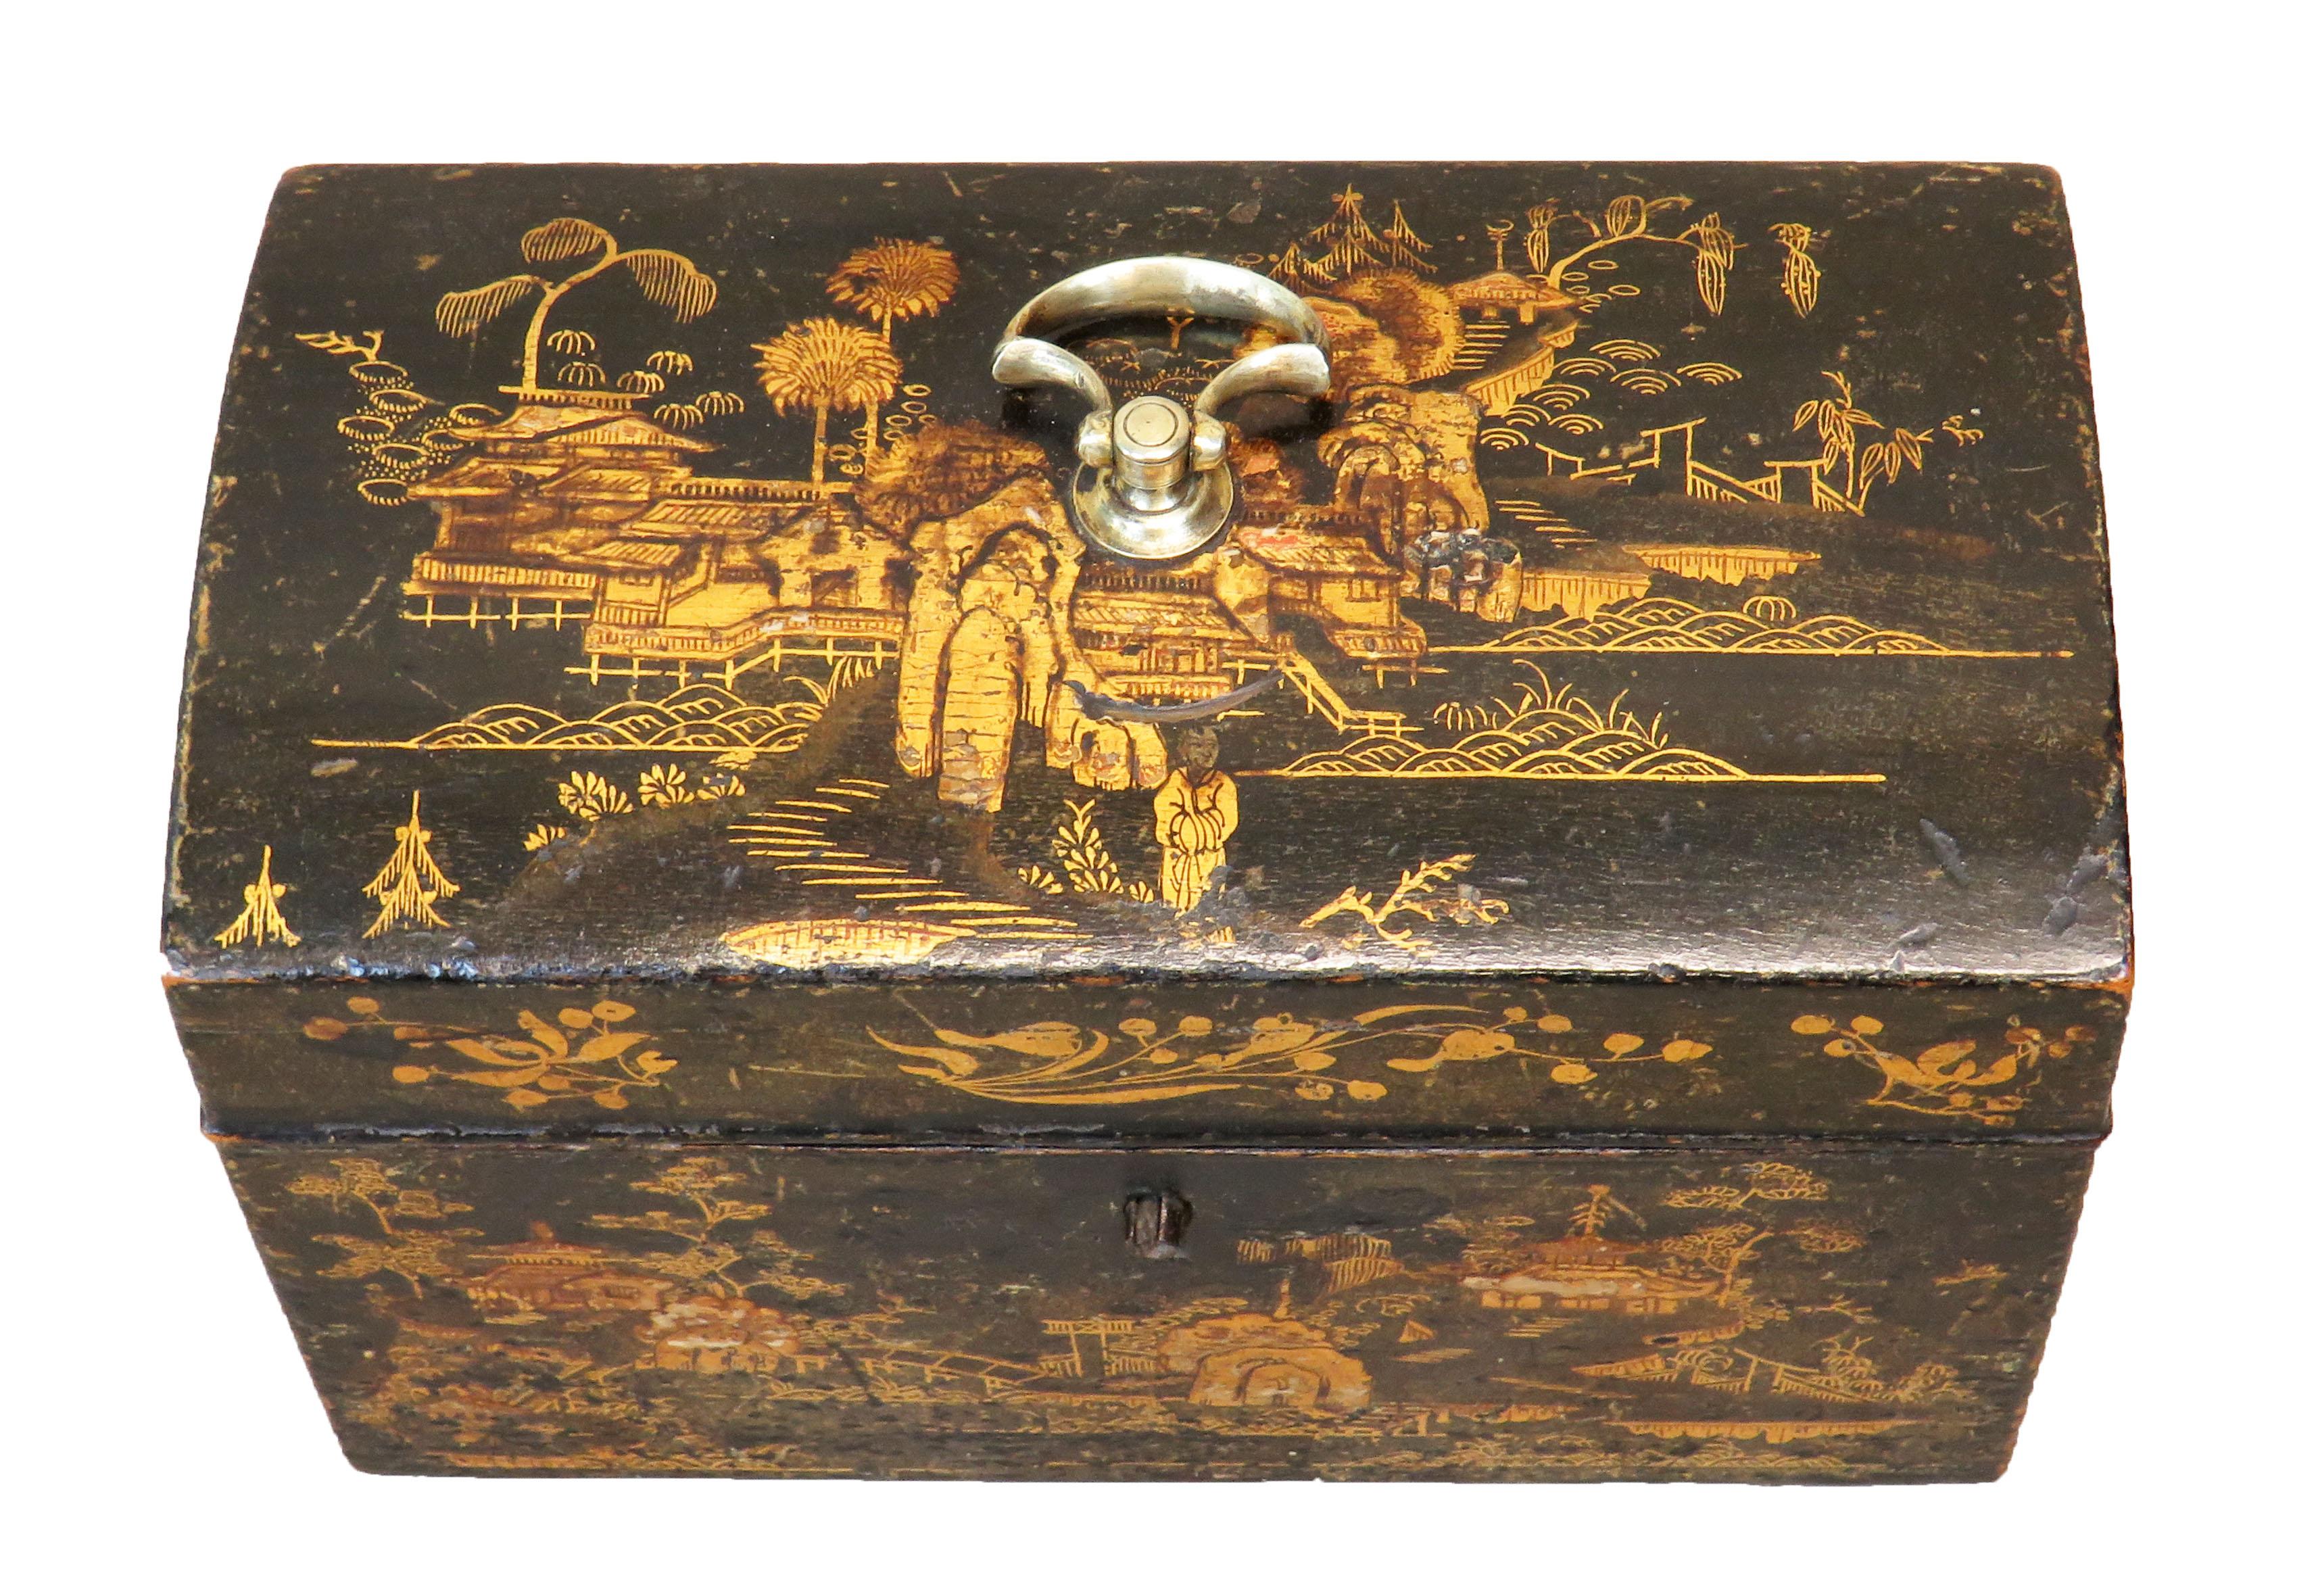 English Antique 18th Century Chinoiserie Decorated Tea Caddy